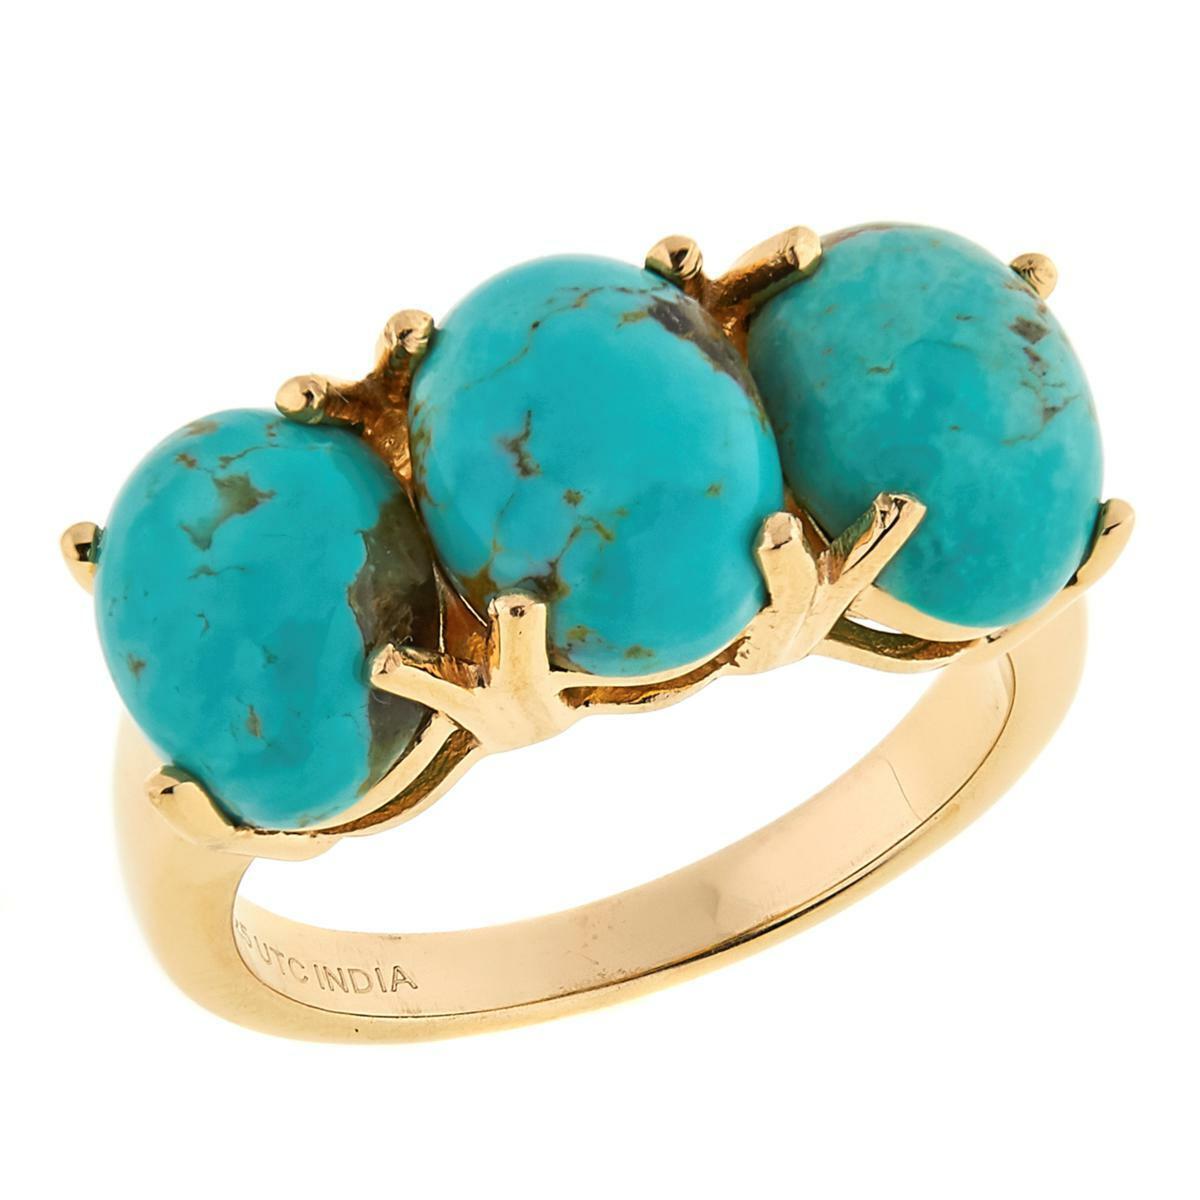 Paul Deasy Gem Gold-Plated 3-Stone Tyrone Turquoise Ring Size 5 Hsn $101